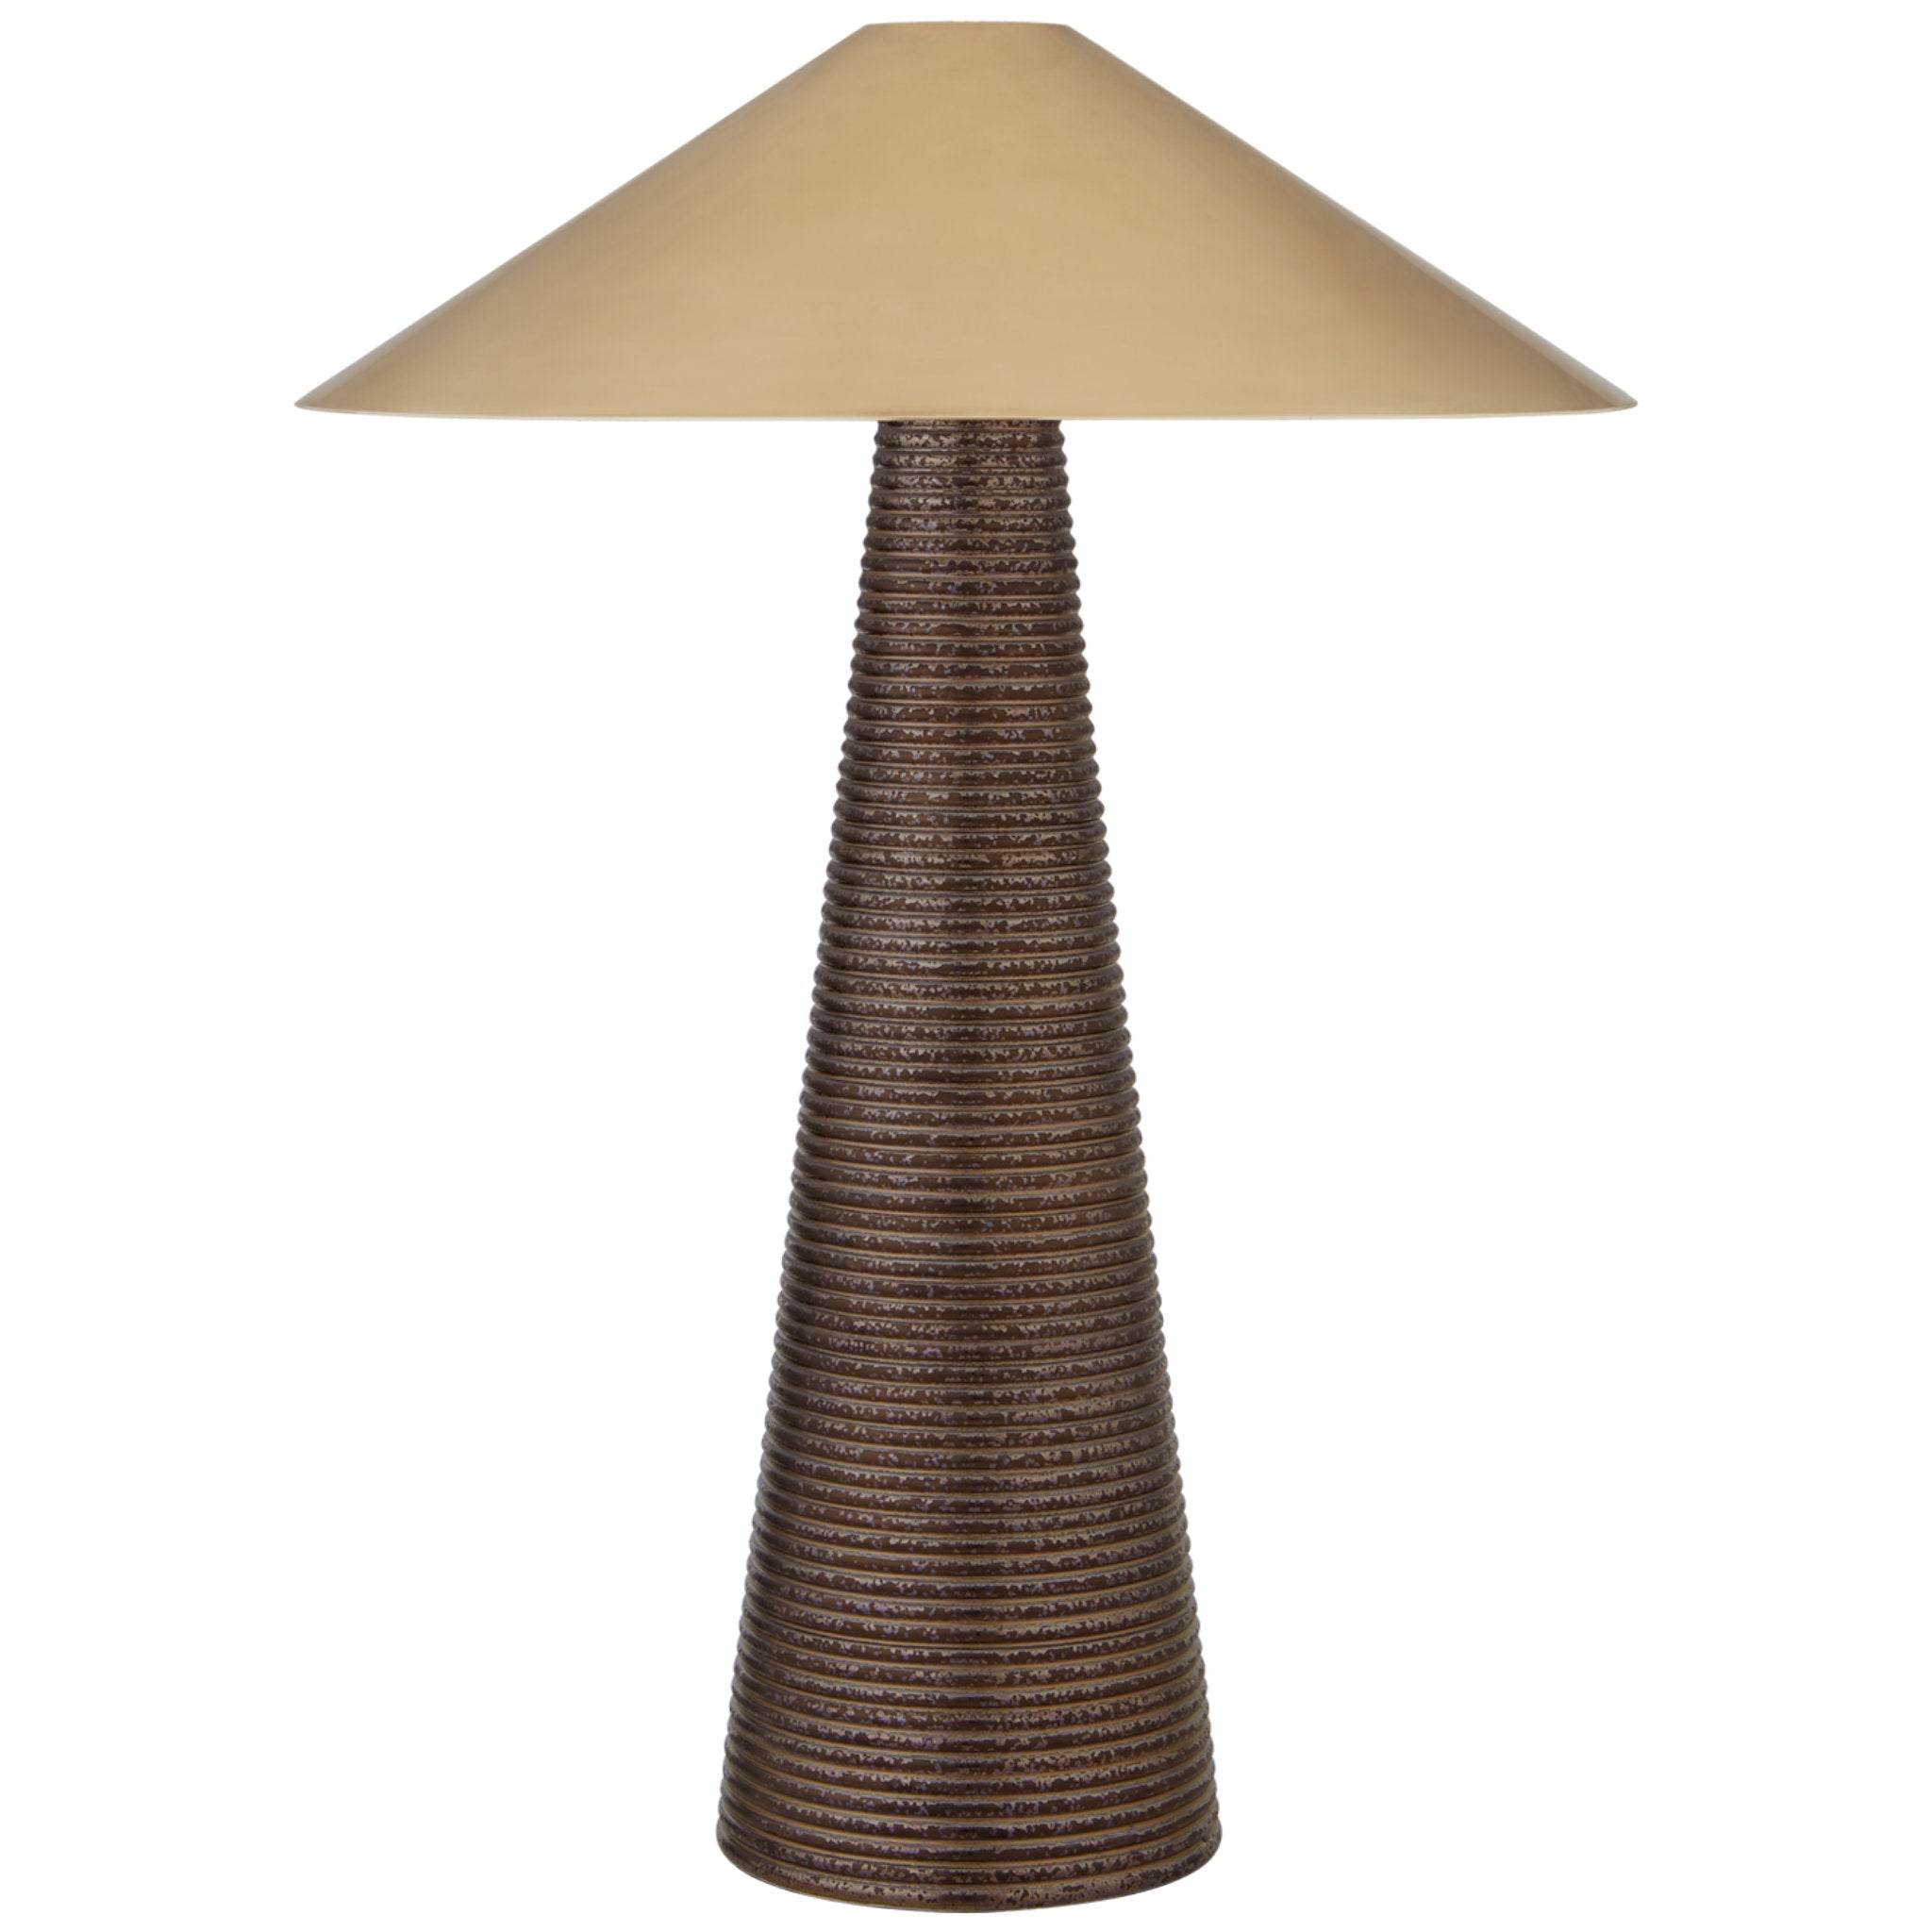 Kelly Wearstler Miramar Table Lamp in Crystal Bronze with Antique-Burnished Brass Shade